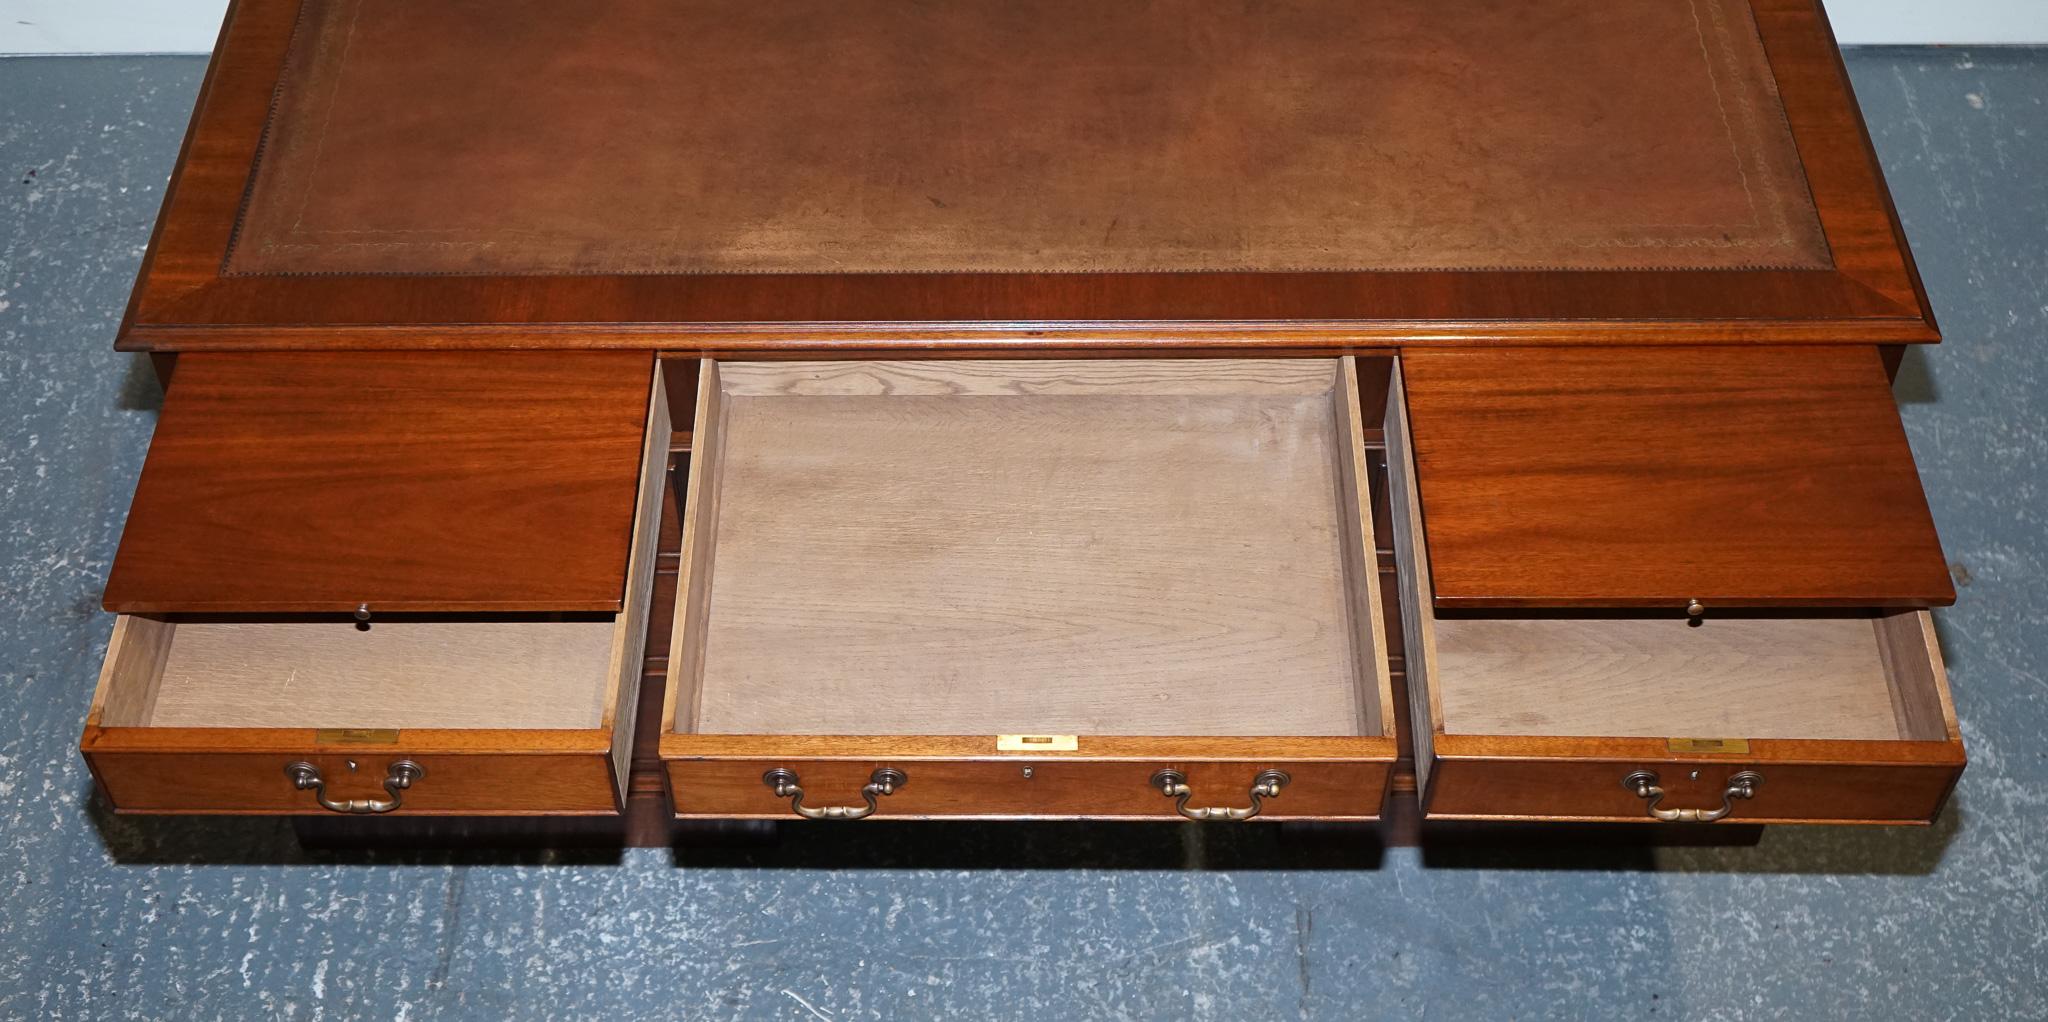 STUNNING LARGE TWiN PEDESTAL DESK BROWN LEATHER TOP SLIDING OUT TRAYS 8 DRAWERS For Sale 4